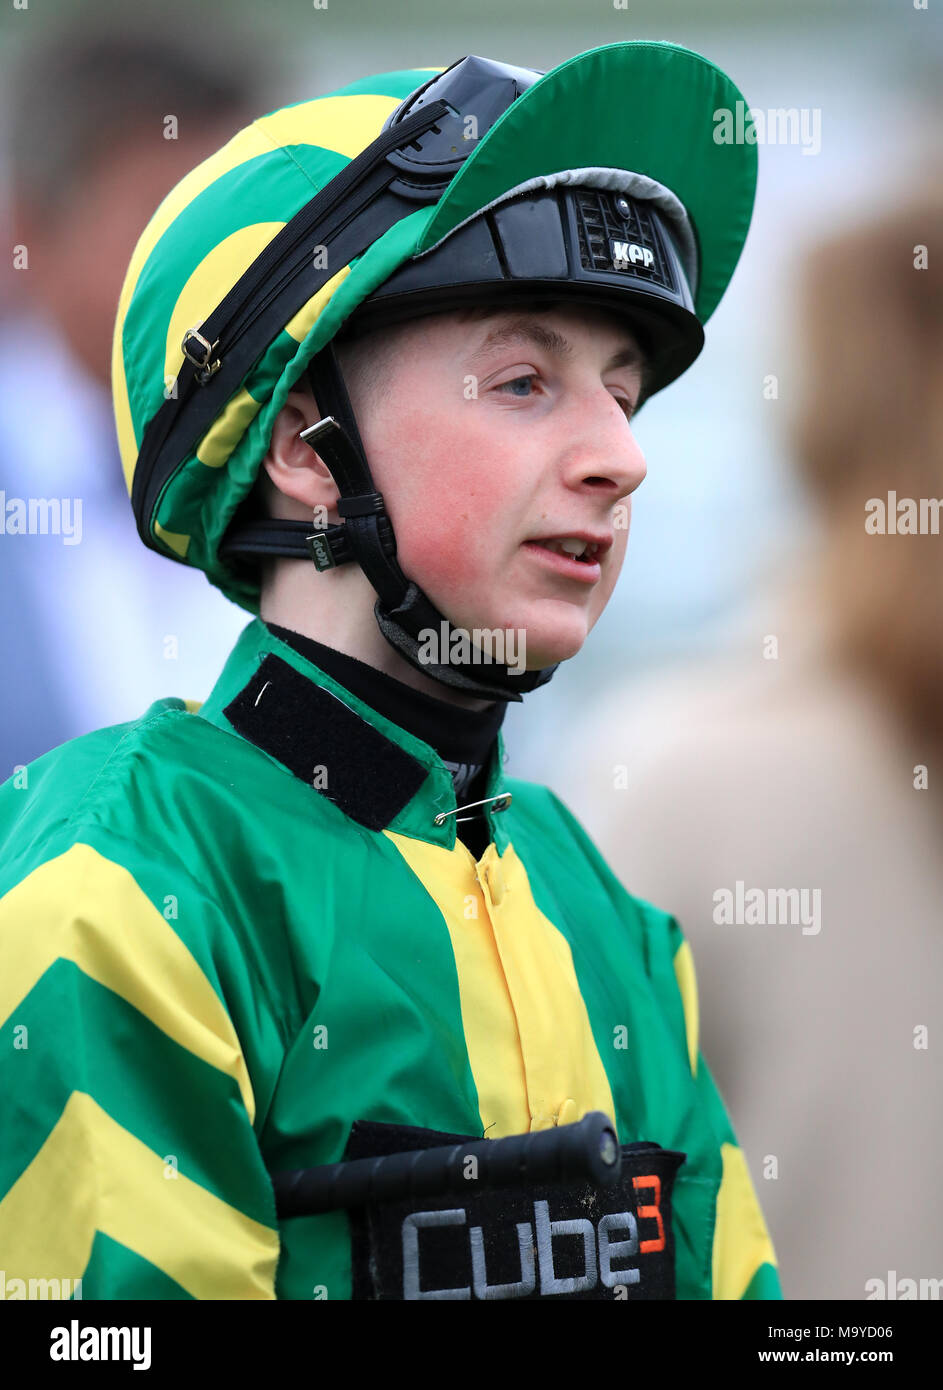 Jockey Andrew Breslin vor 32Red.com Lehrling Behinderung bei 32 Rot Lincoln Tag in Doncaster Racecourse Stockfoto